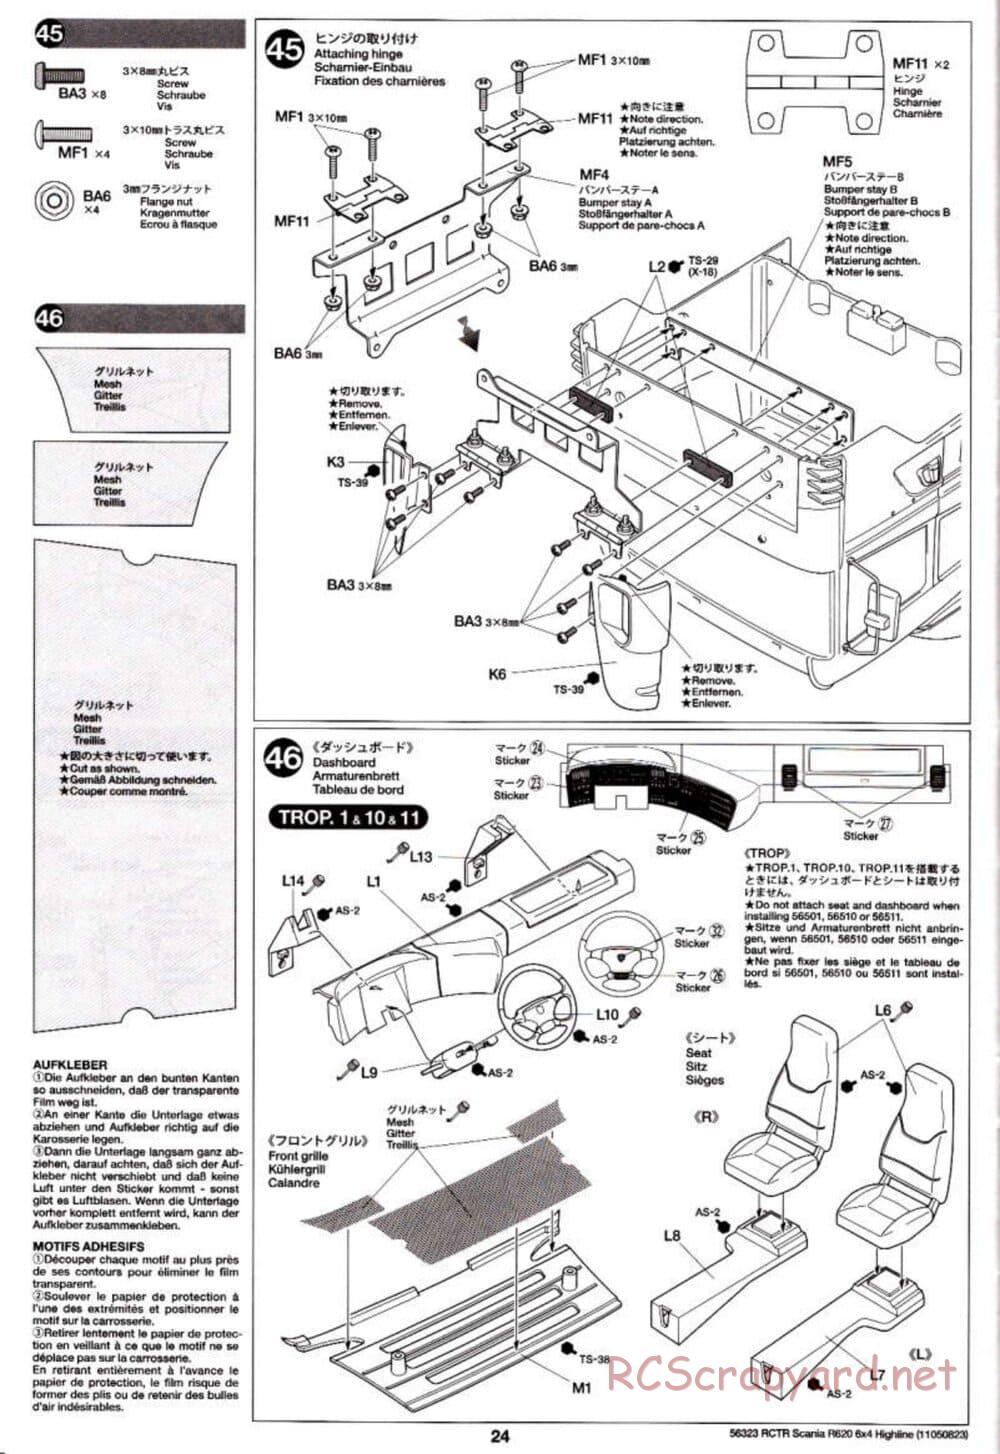 Tamiya - Scania R620 6x4 Highline Tractor Truck Chassis - Manual - Page 24